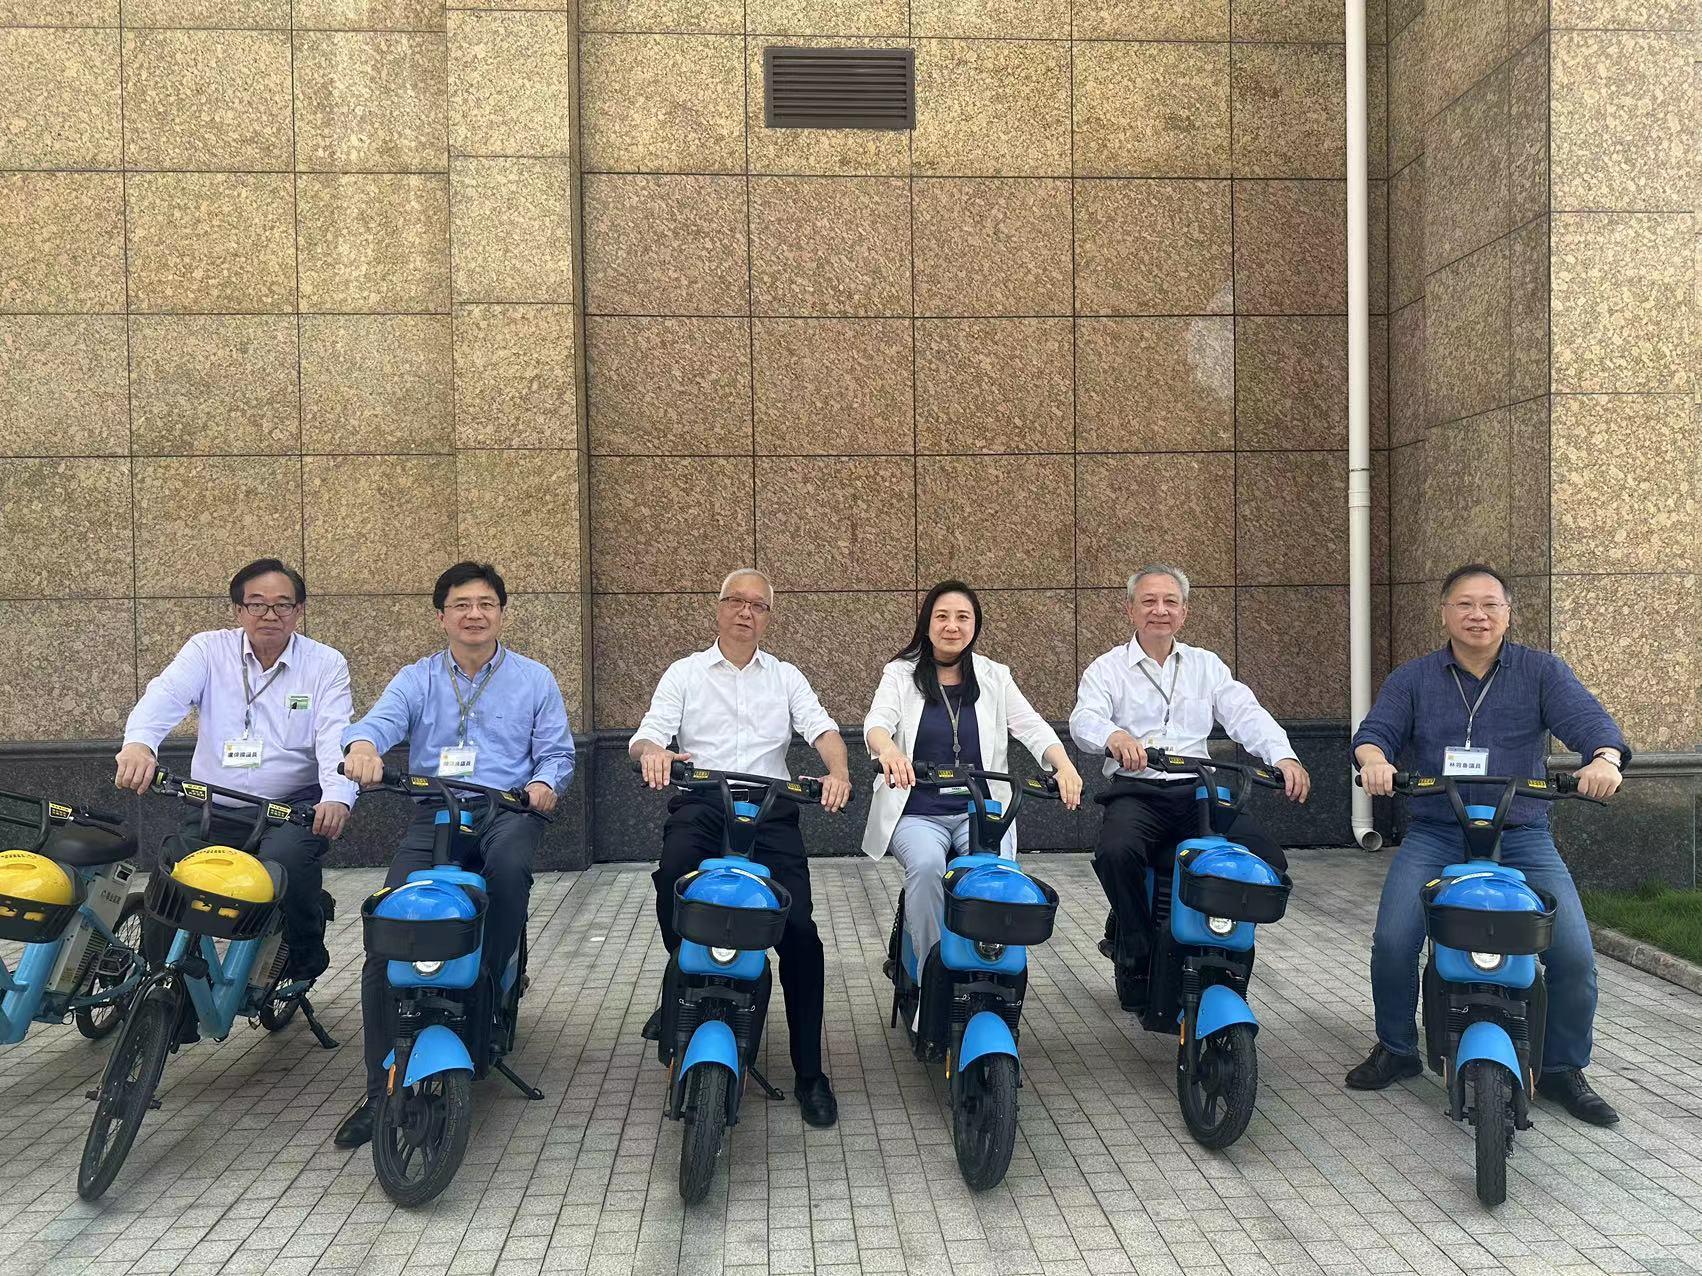 The Secretary for Environment and Ecology, Mr Tse Chin-wan, together with the Legislative Council Panel on Environmental Affairs, today (August 8) visited the Nanhai Hydrogen Center in Foshan in the morning. They received a briefing from a representative on the planning and achievements of hydrogen energy development in Foshan to learn more about the development and application of hydrogen energy in the Mainland. Mr Tse (third left) and the delegation of the Legislative Council Panel on Environmental Affairs are pictured with hydrogen motorcycles.